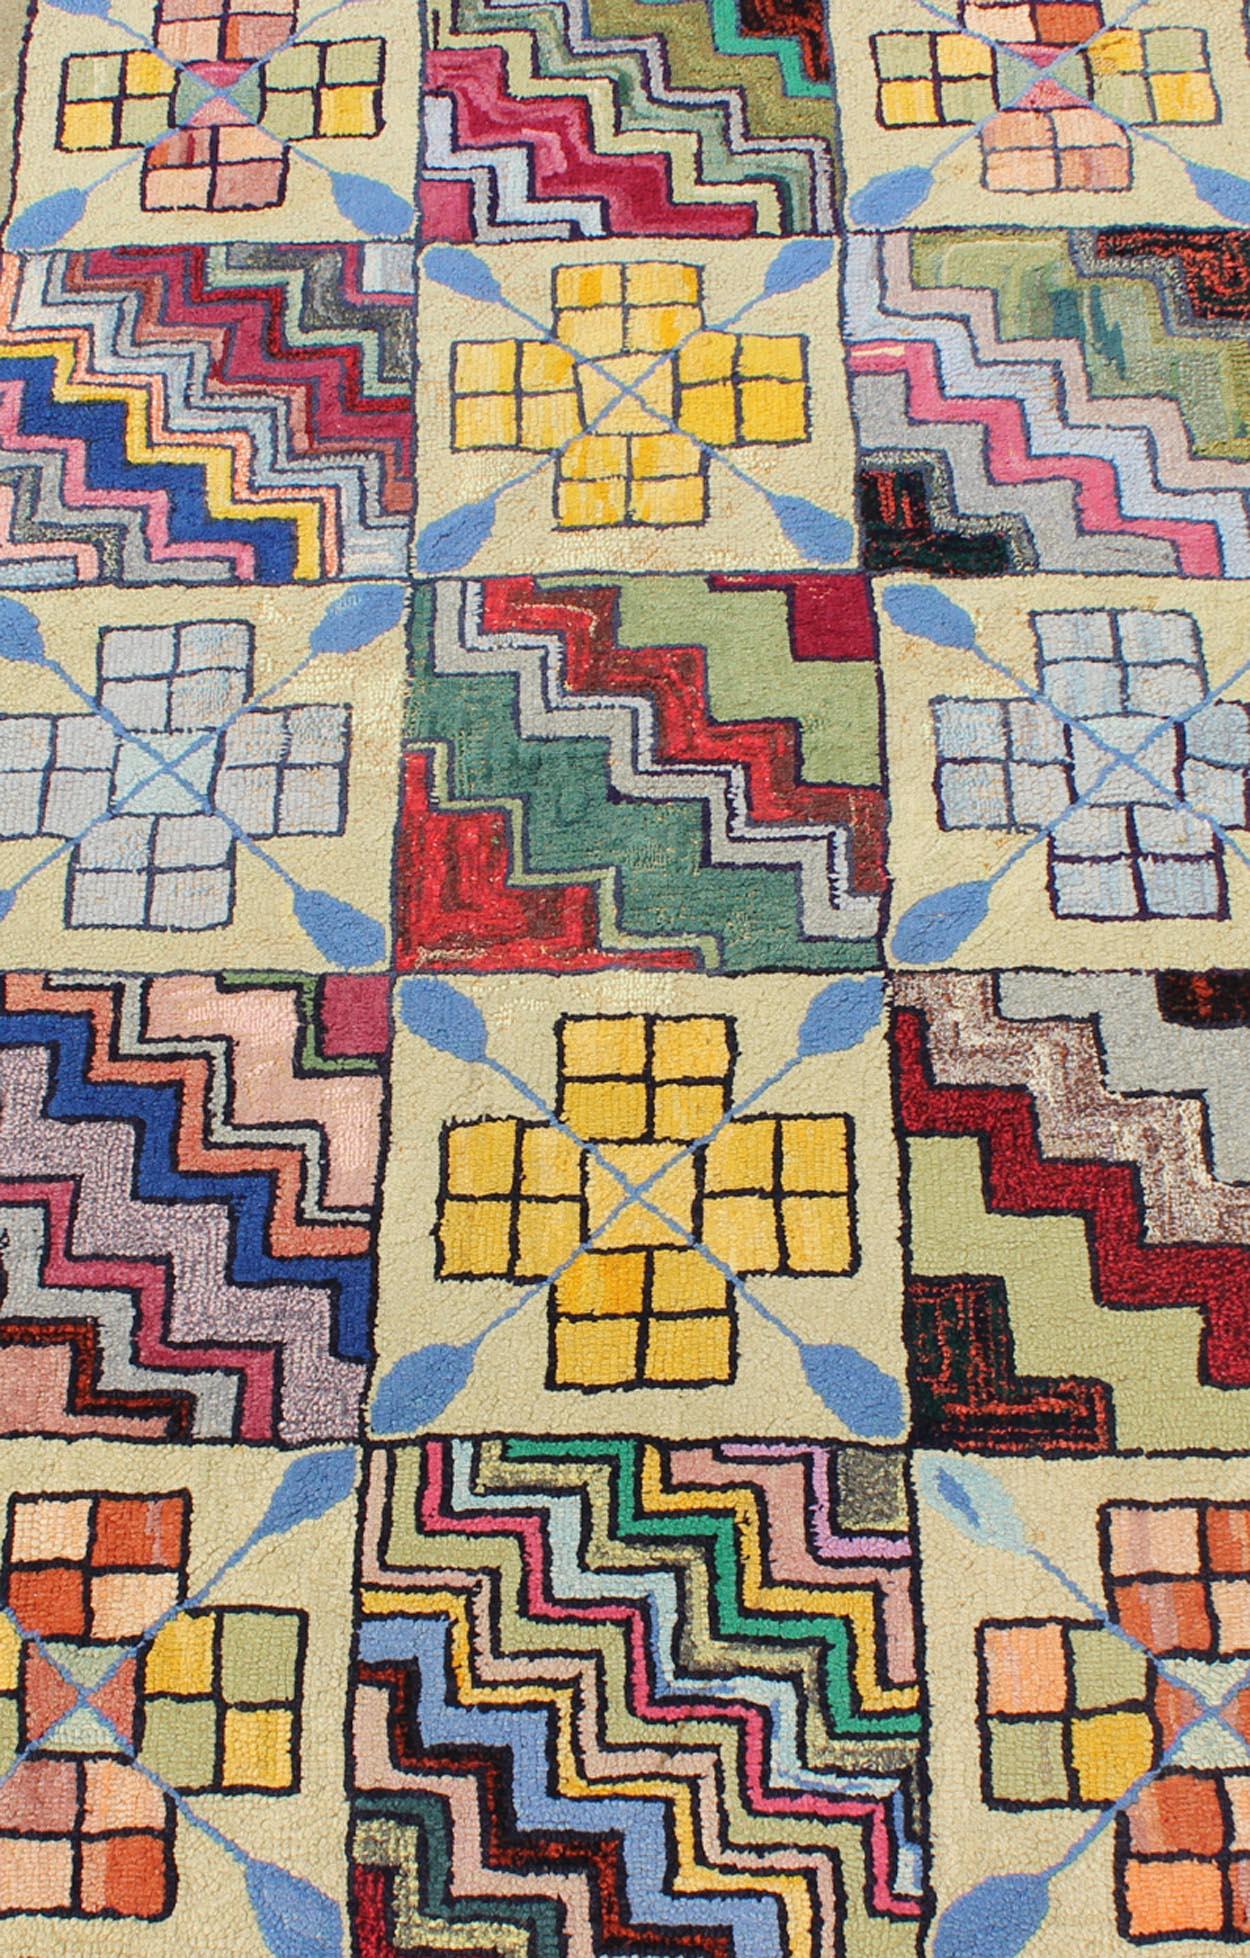 Mid-20th Century Rainbow Checkerboard Vintage American Hooked Rug with Geometric Cross Designs